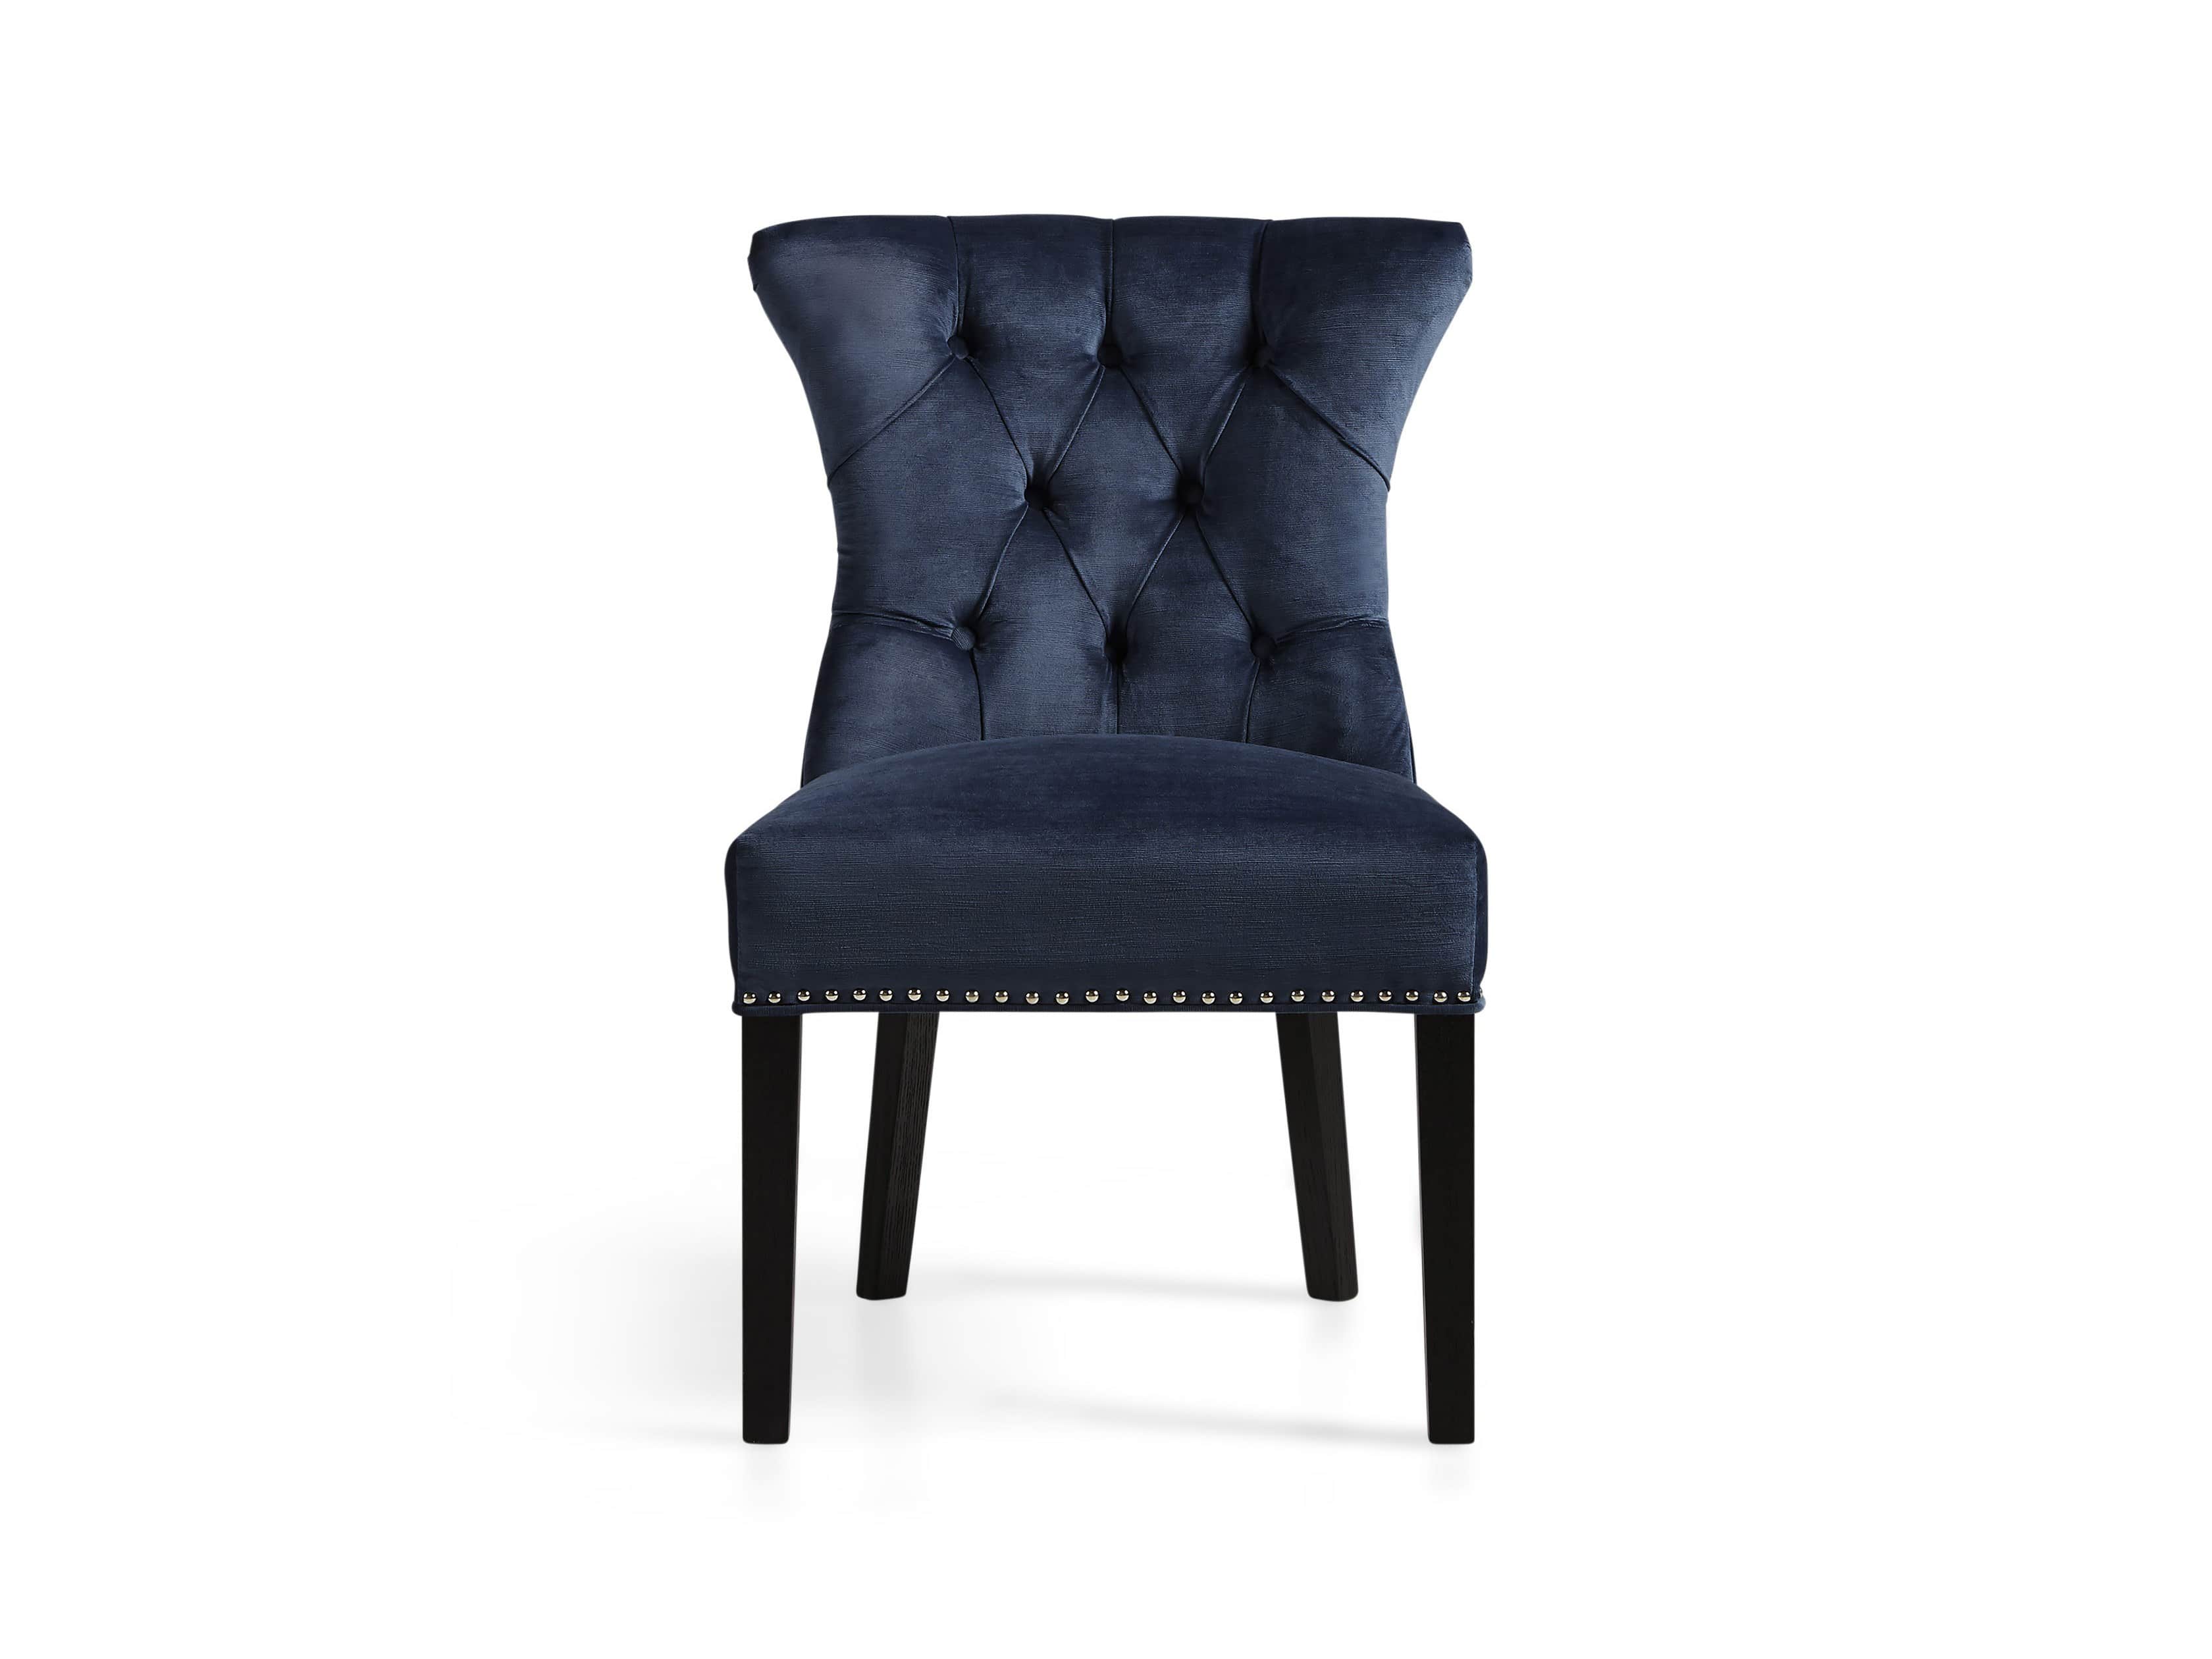 Alexis Dining Chair Arhaus, Navy Velvet Tufted Dining Chairs